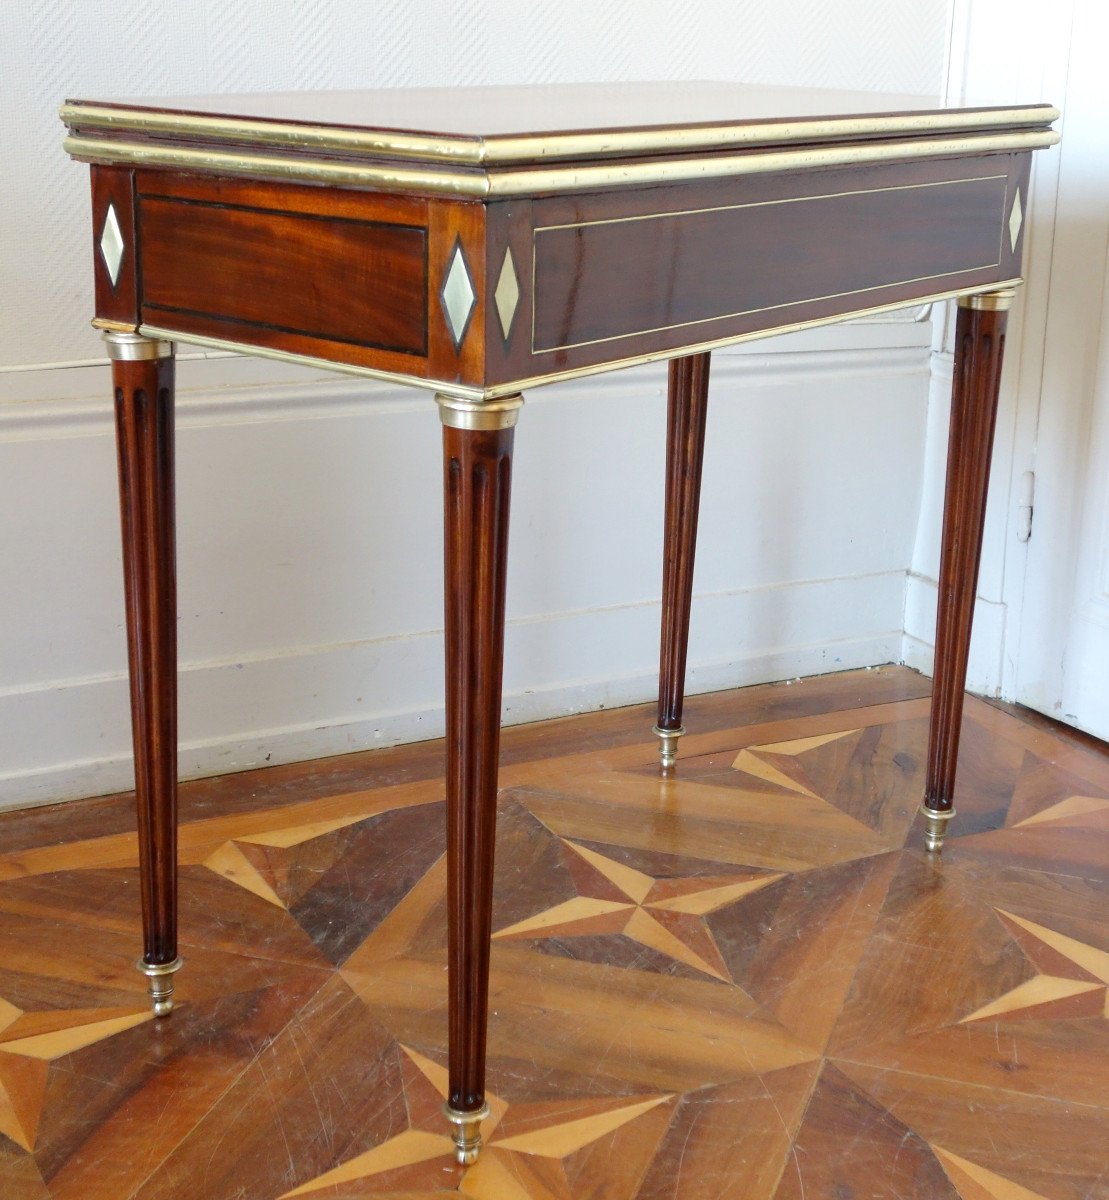 Louis XVI Directoire Game Table In Mahogany, Ebony And Brass, Late Eighteenth Century Period-photo-4